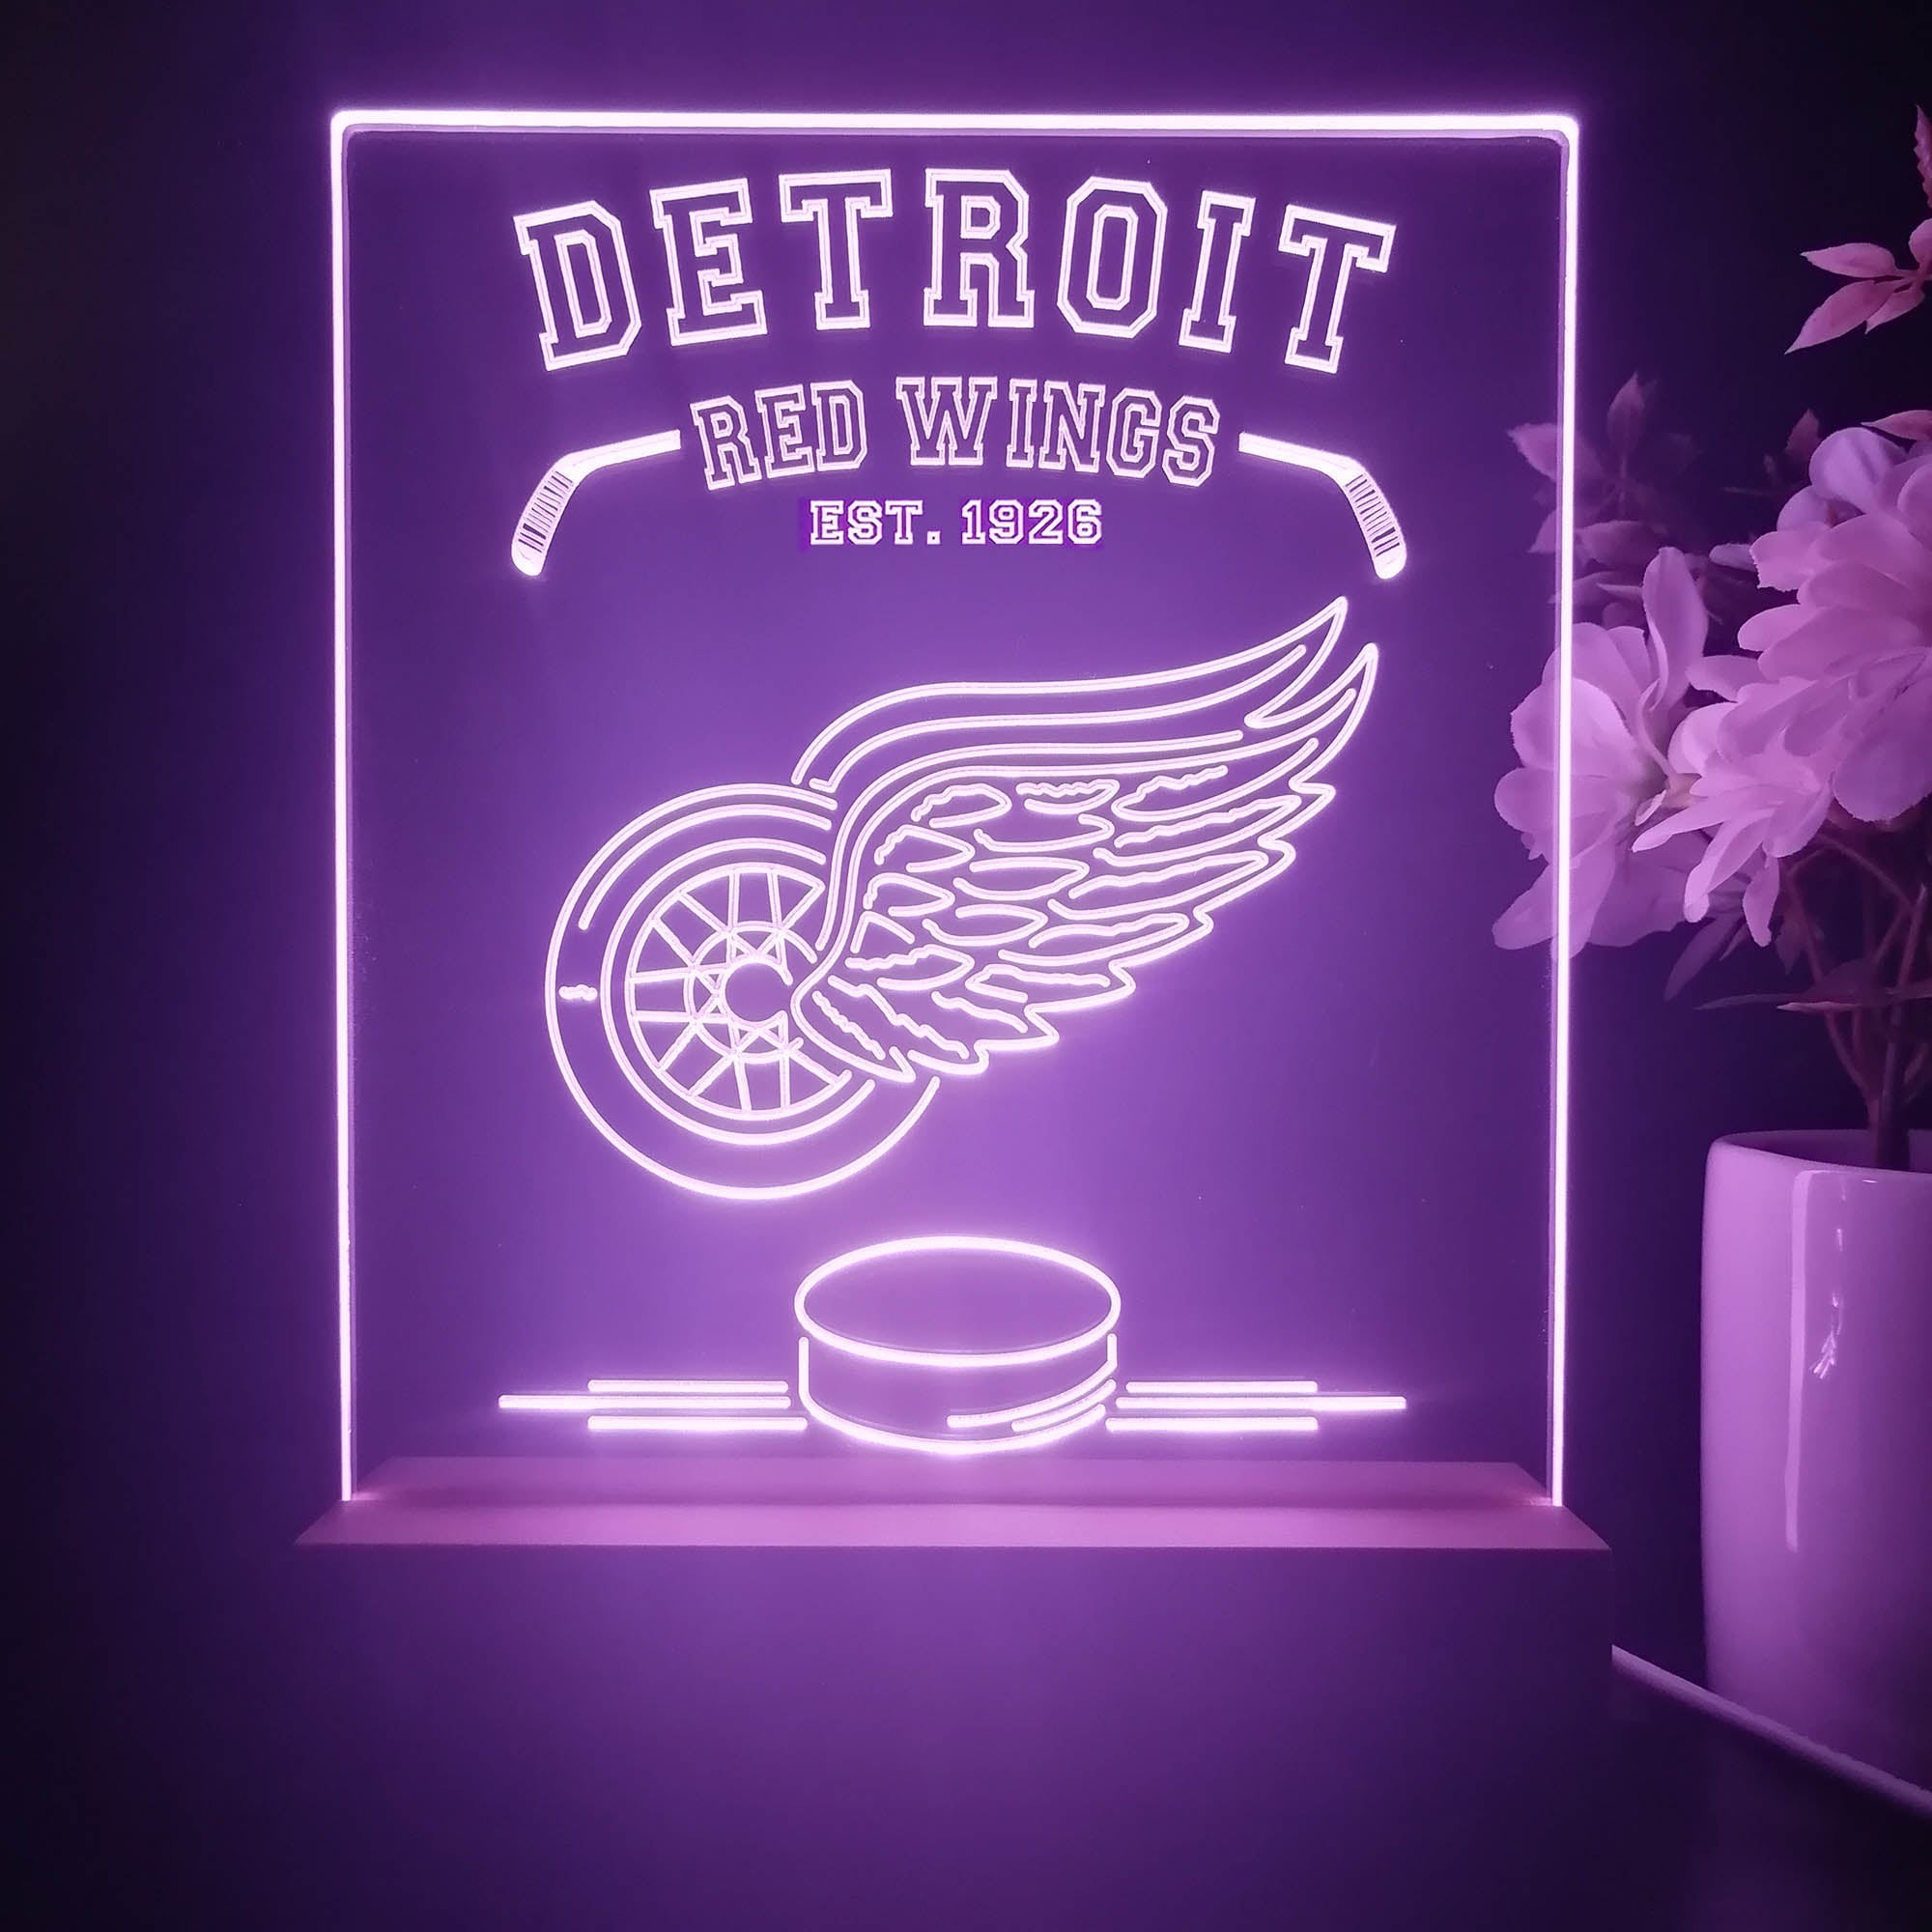 Personalized Detroit Red Wings Souvenir Neon LED Night Light Sign